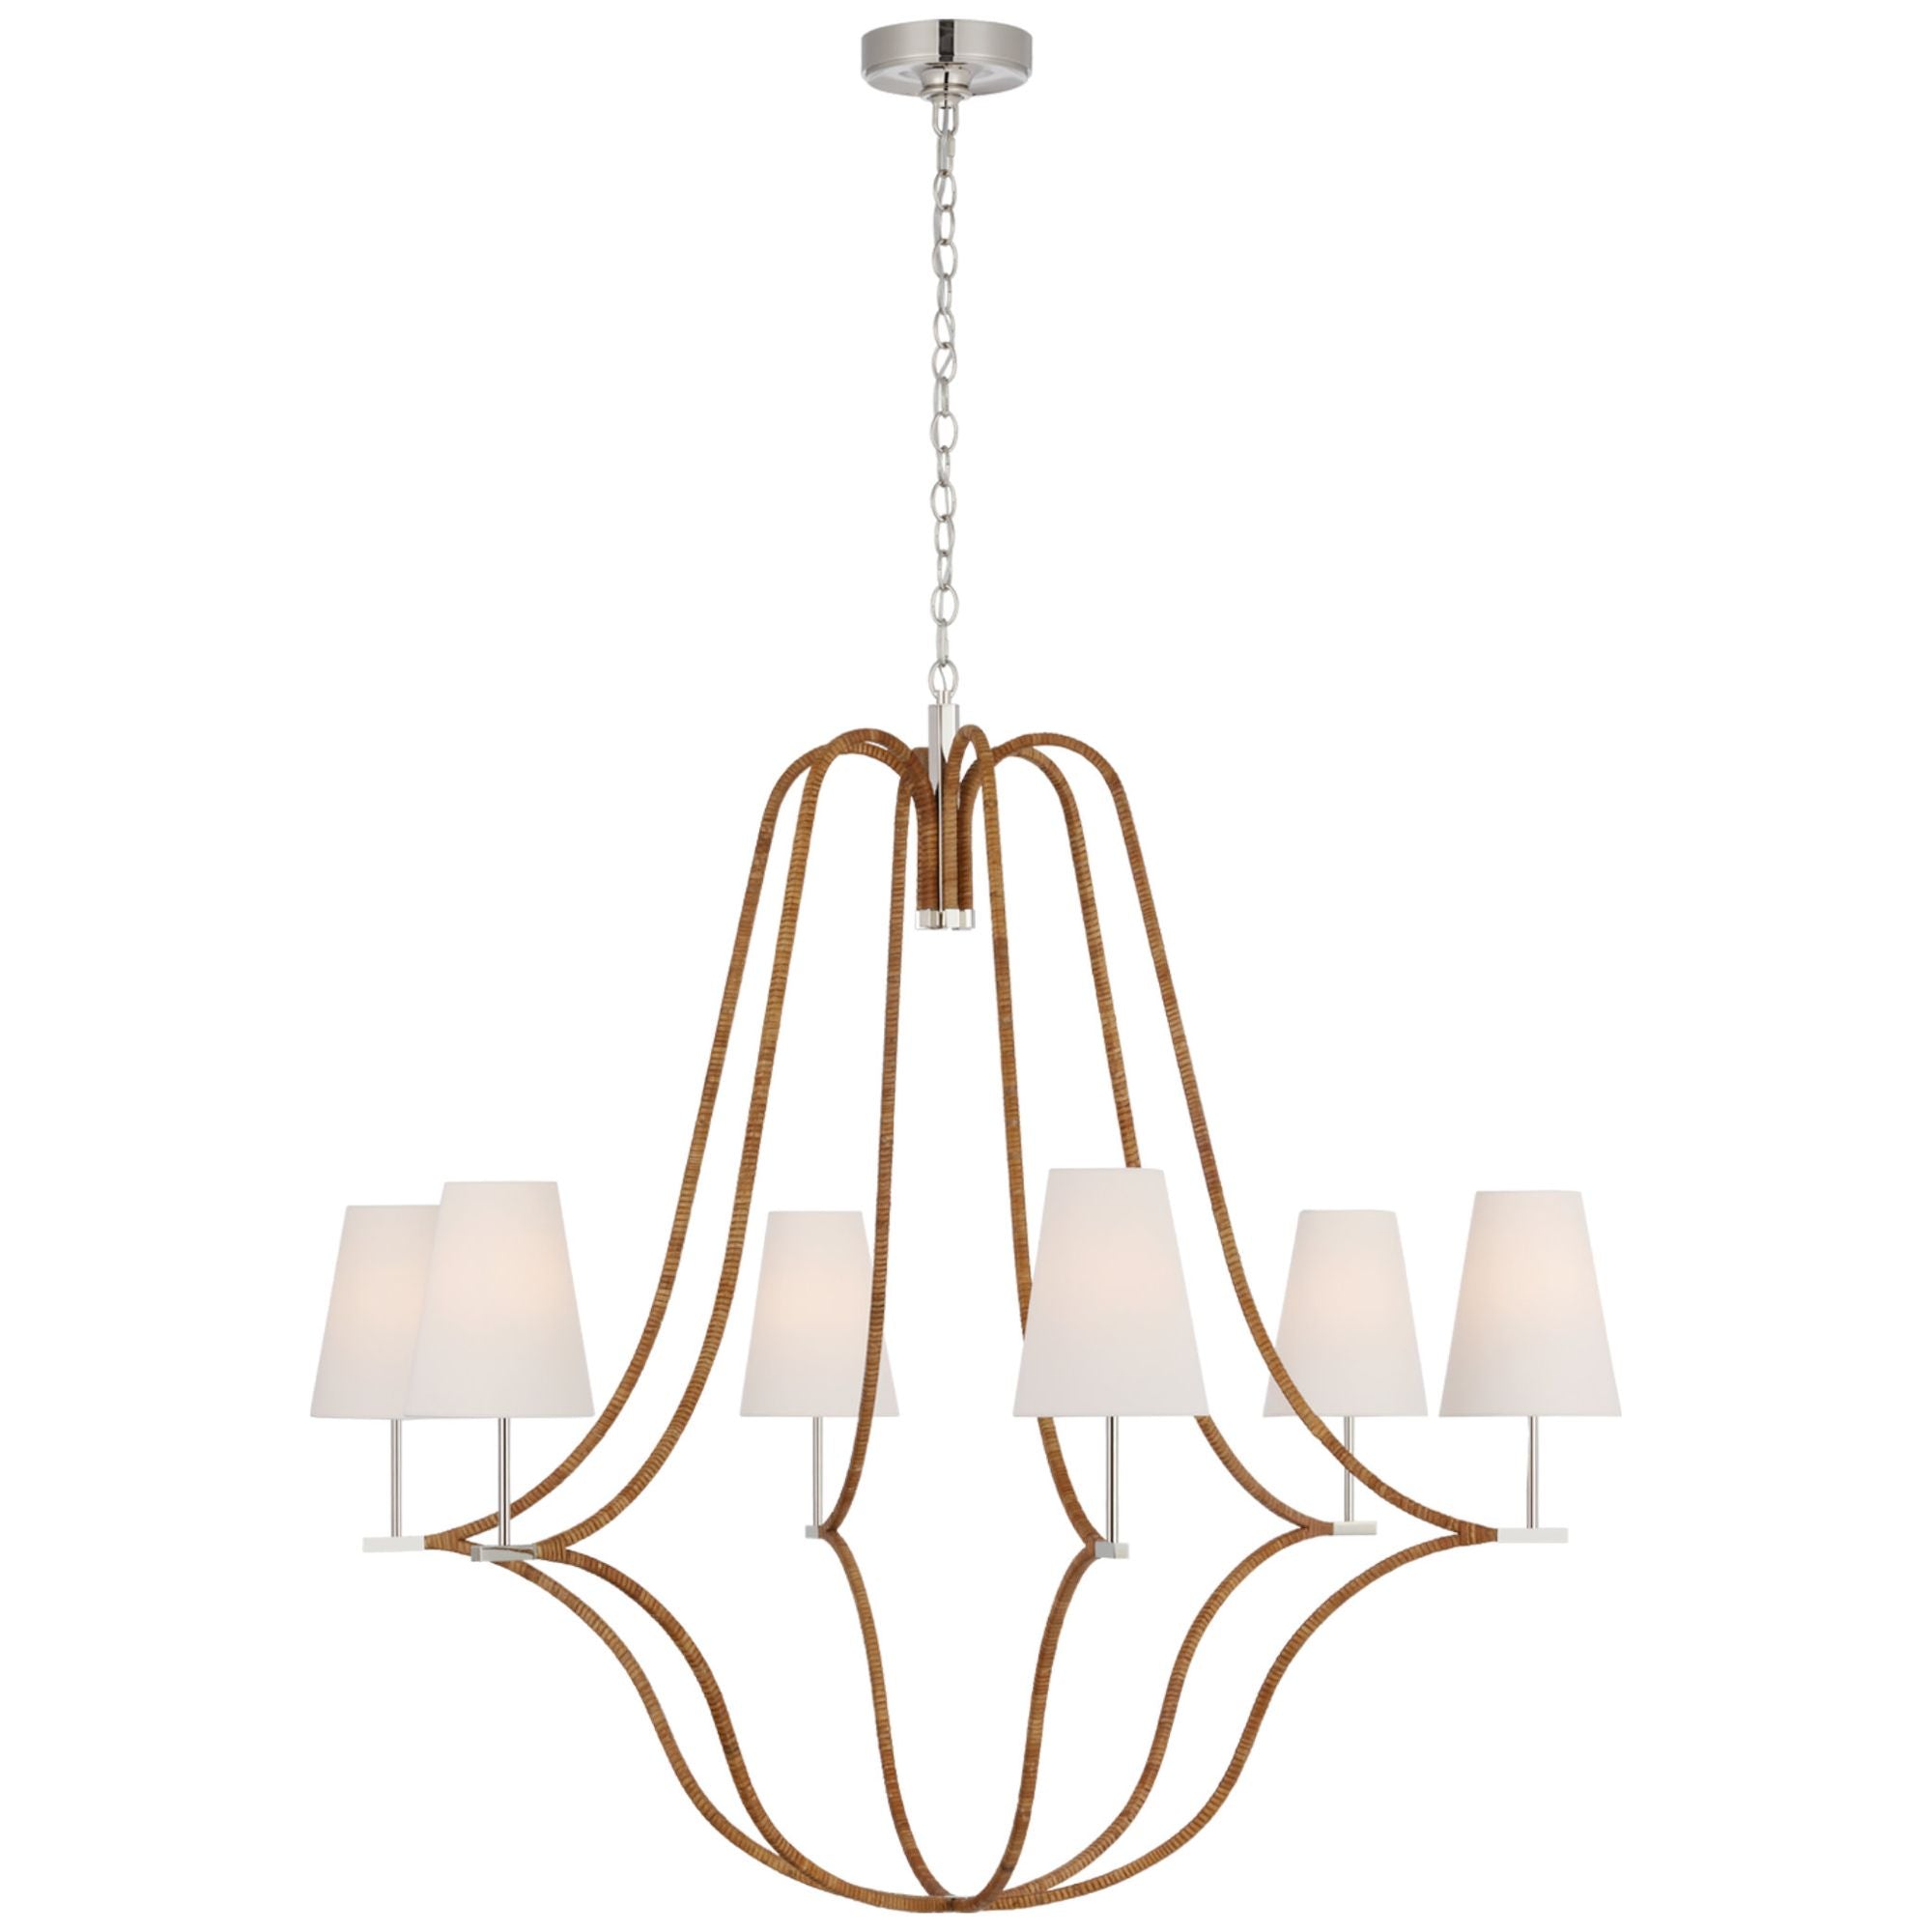 Chapman & Myers Biscayne Extra Large Wrapped Chandelier in Polished Nickel and Natural Rattan with Linen Shades